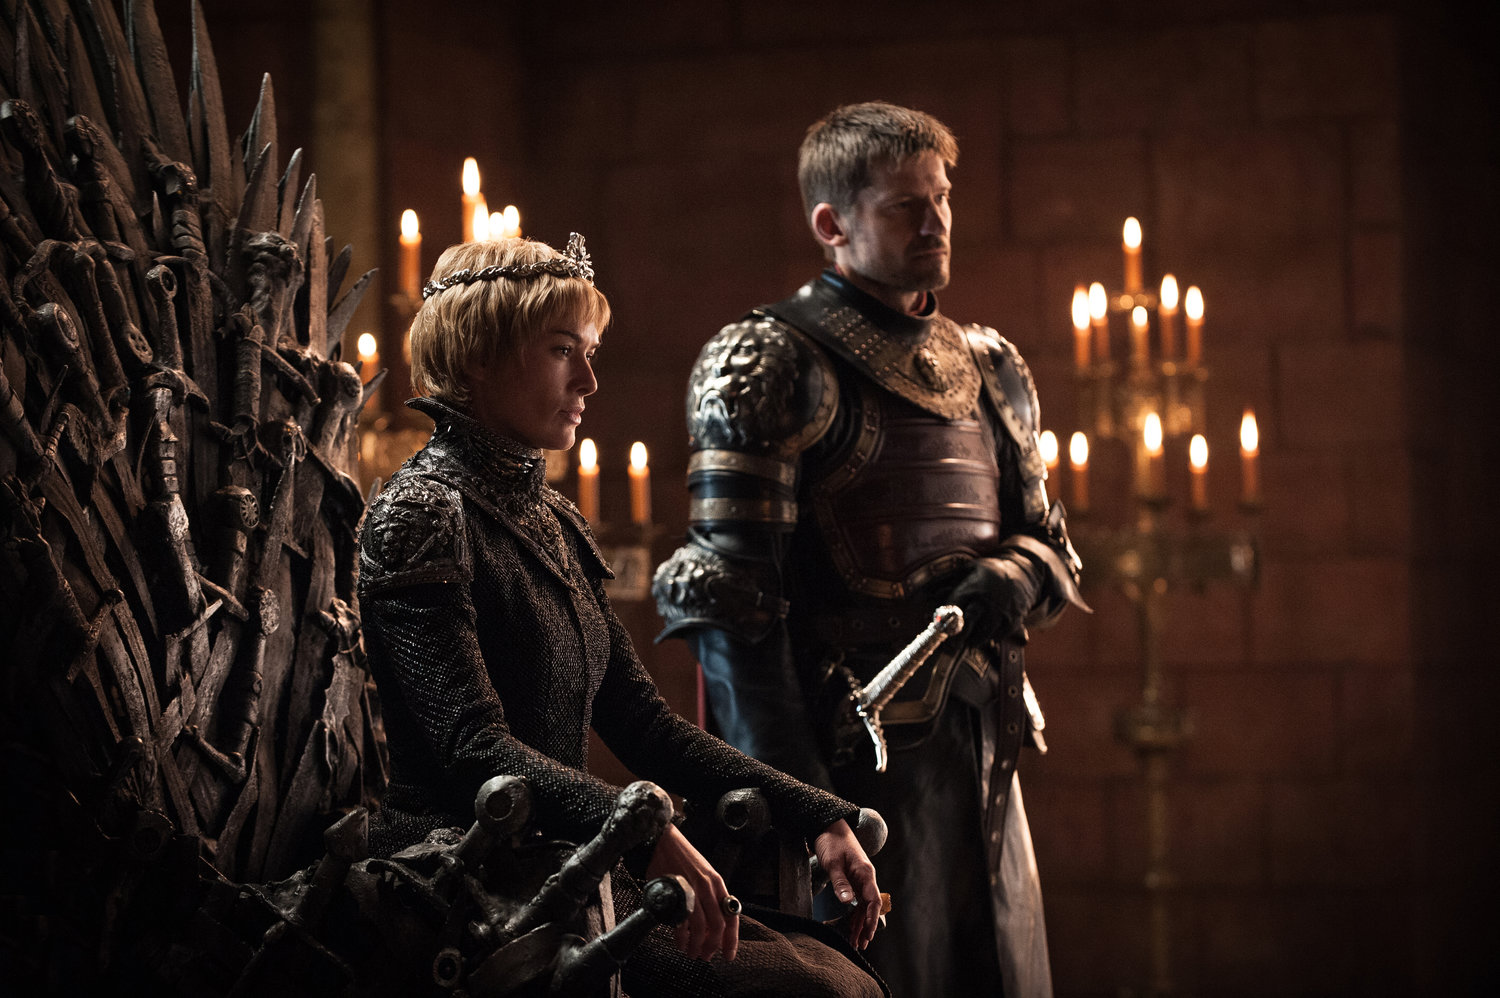 Game of Thrones - Season 7 - Cersei and Jaime Lannister